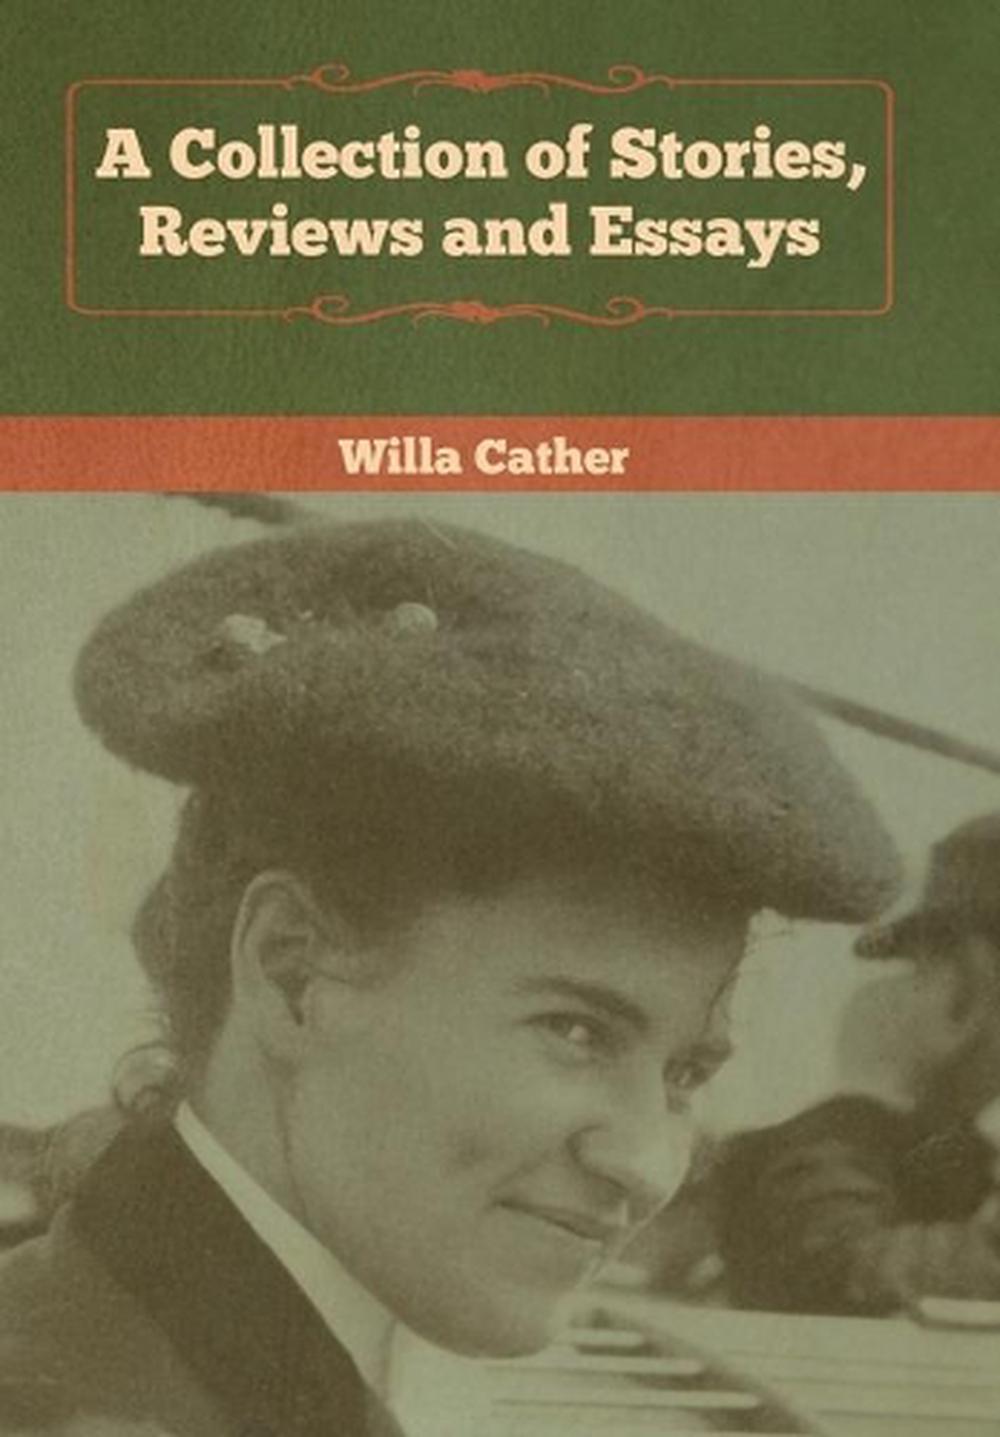 1918 novel by willa cather